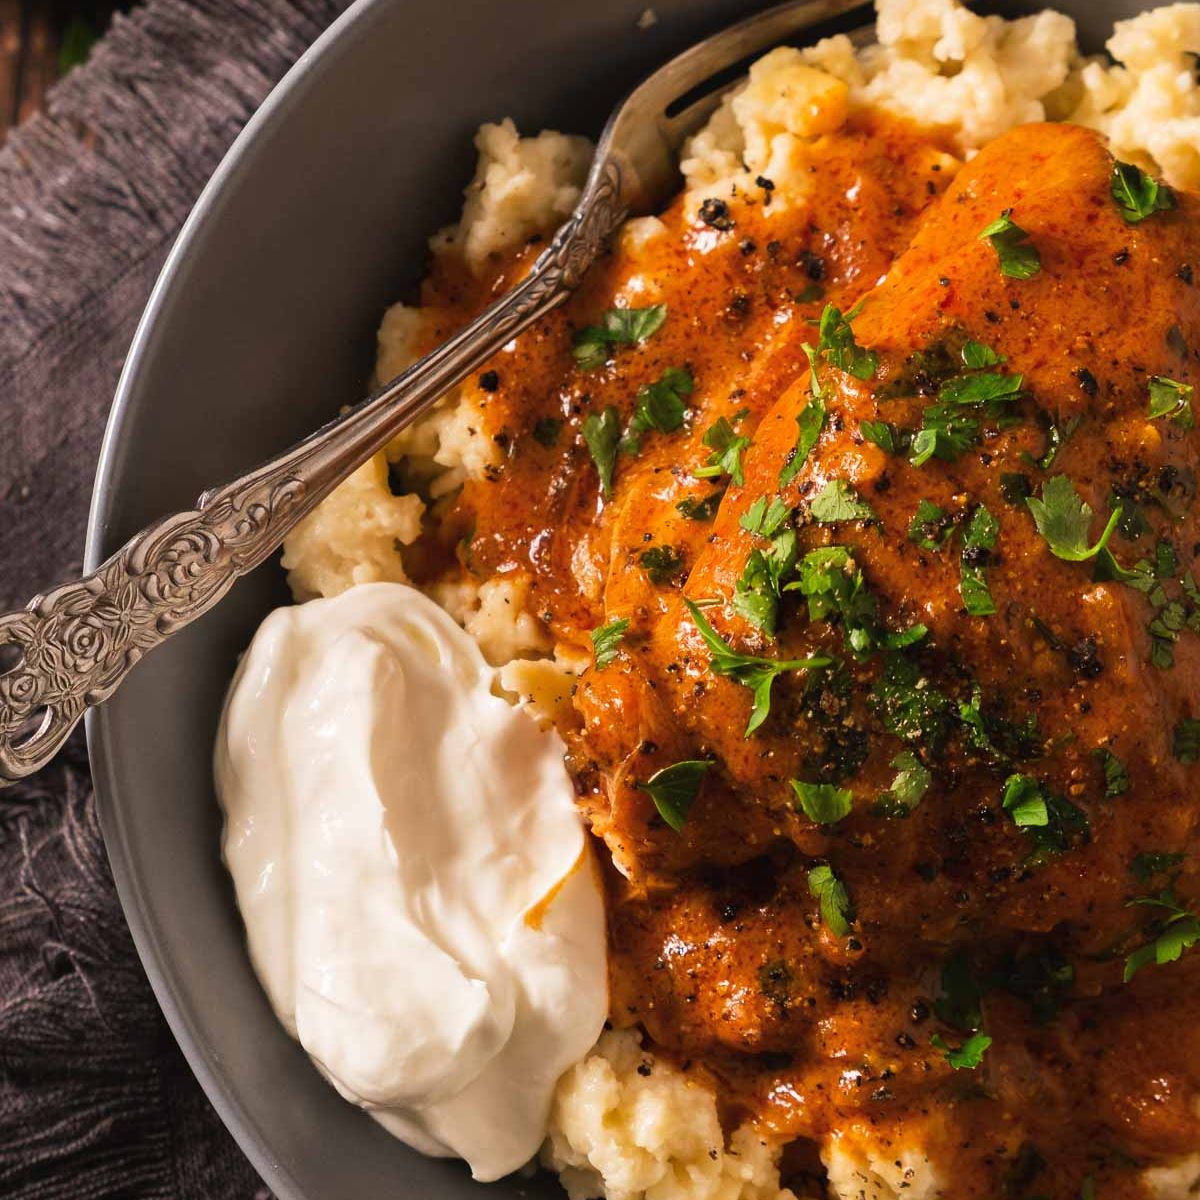 Chicken paprikash on top of spaetzle or nokedli on a plate with a dollop of sour cream on the side.